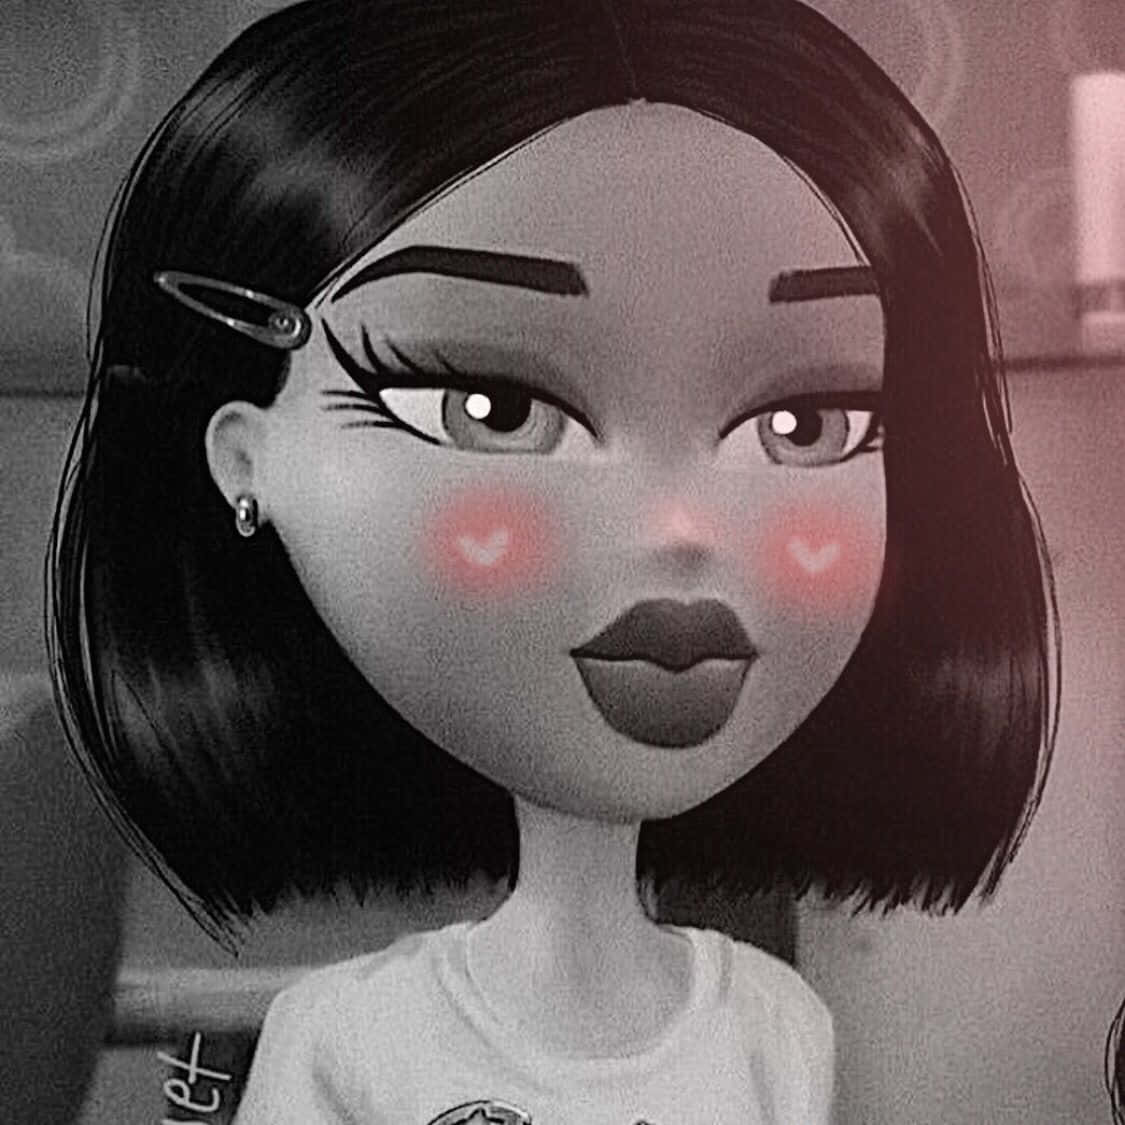 A Cartoon Of A Girl With Black Hair And Black Eyes